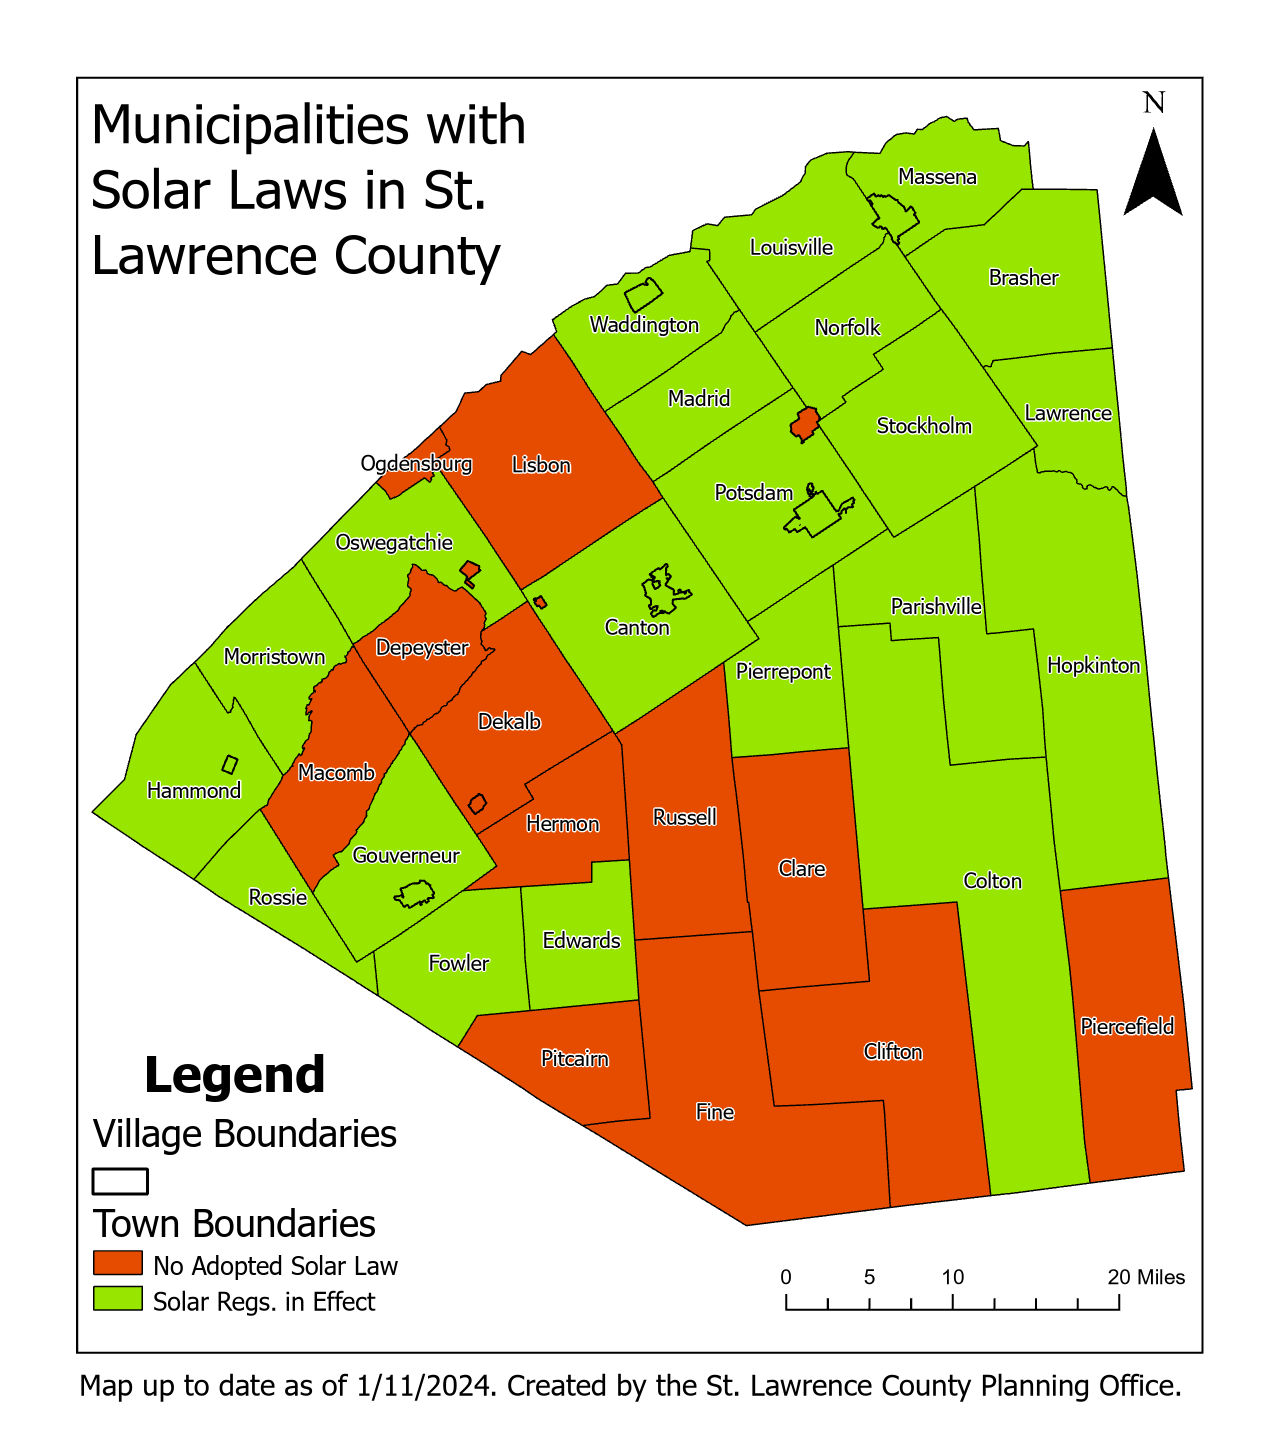 Municipalities in St. Lawrence County with Solar Energy Regulations